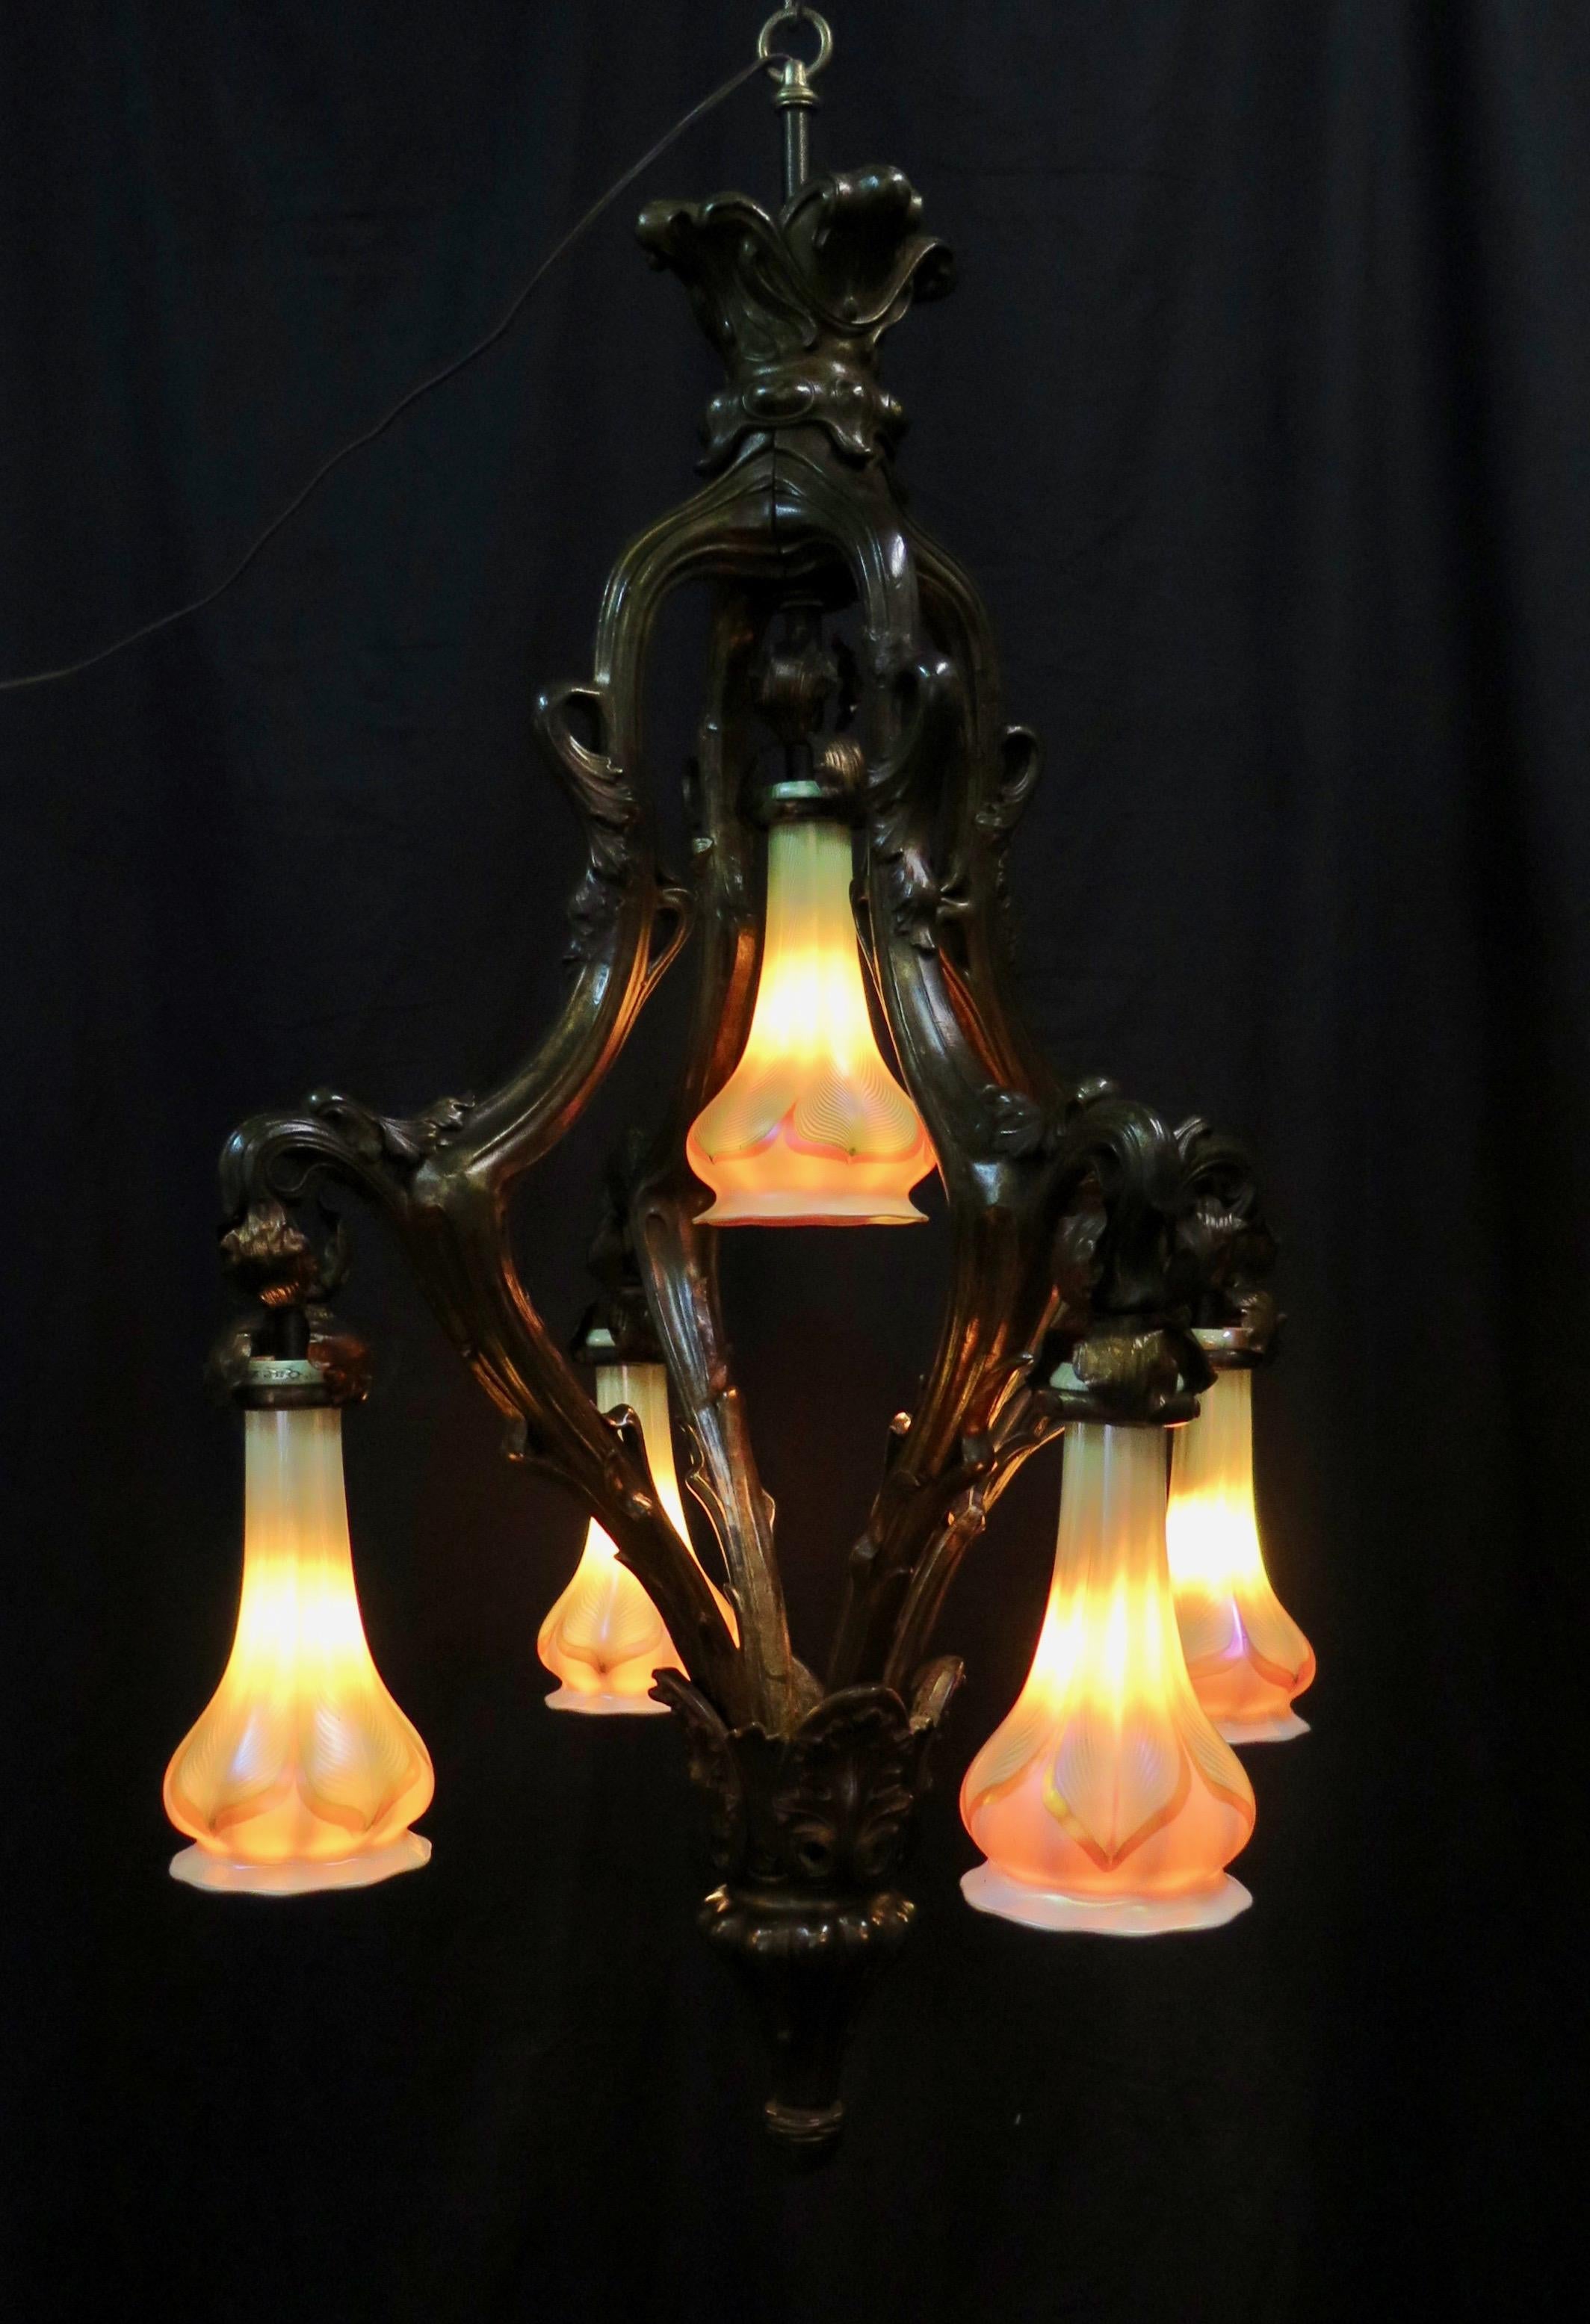 This vintage early 20th century Art Nouveau chandelier is beautifully designed with a brown patinated copper clad body and accented with long art glass shades. The five light ceiling fixture has a flowing floral Art Nouveau motif that embraces its